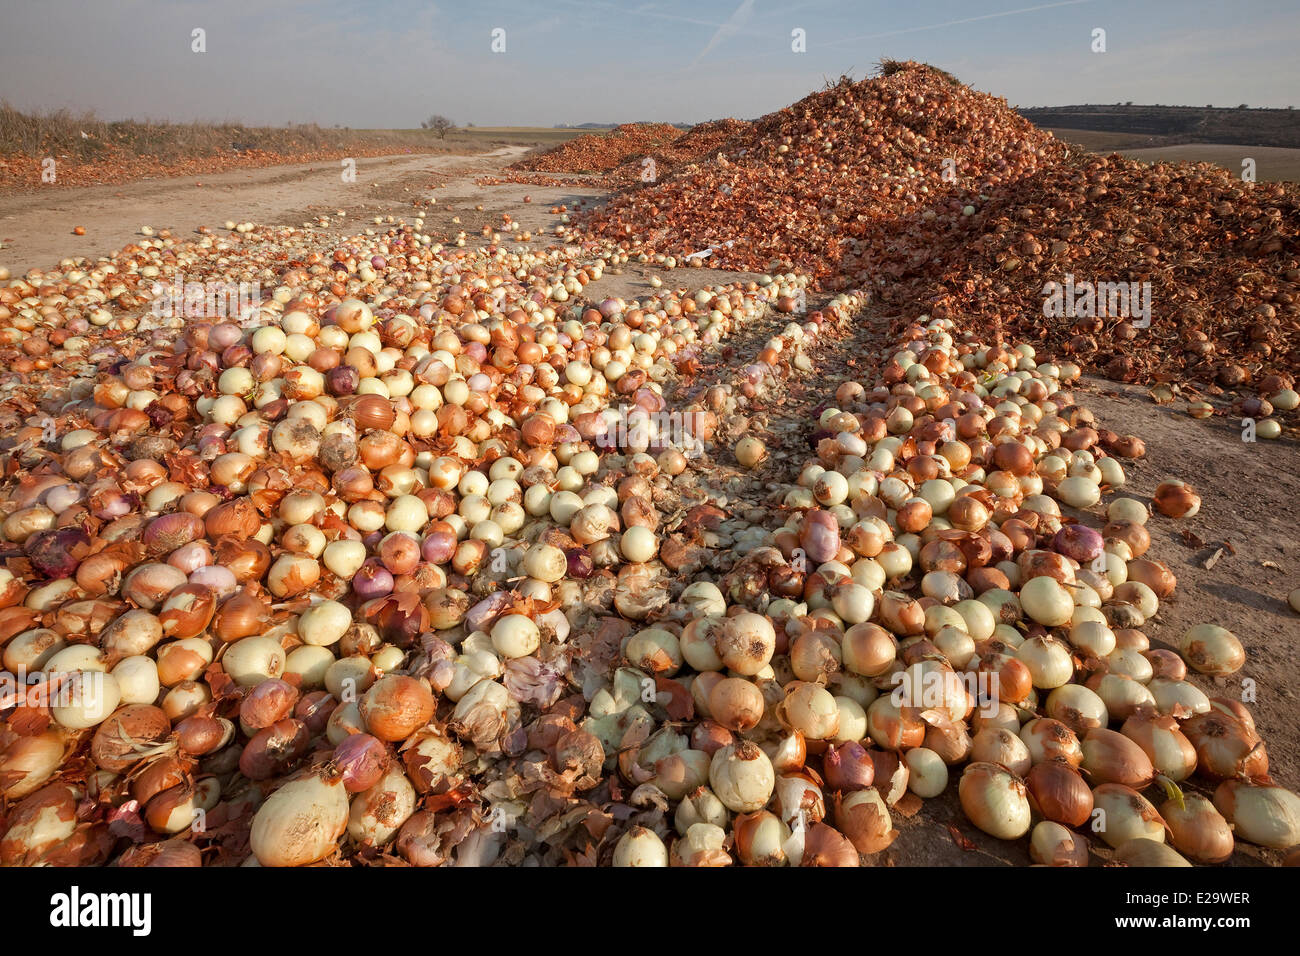 Spain, Catalonia, Lleida Province, Montsonis, deposit of onions in the nature Stock Photo